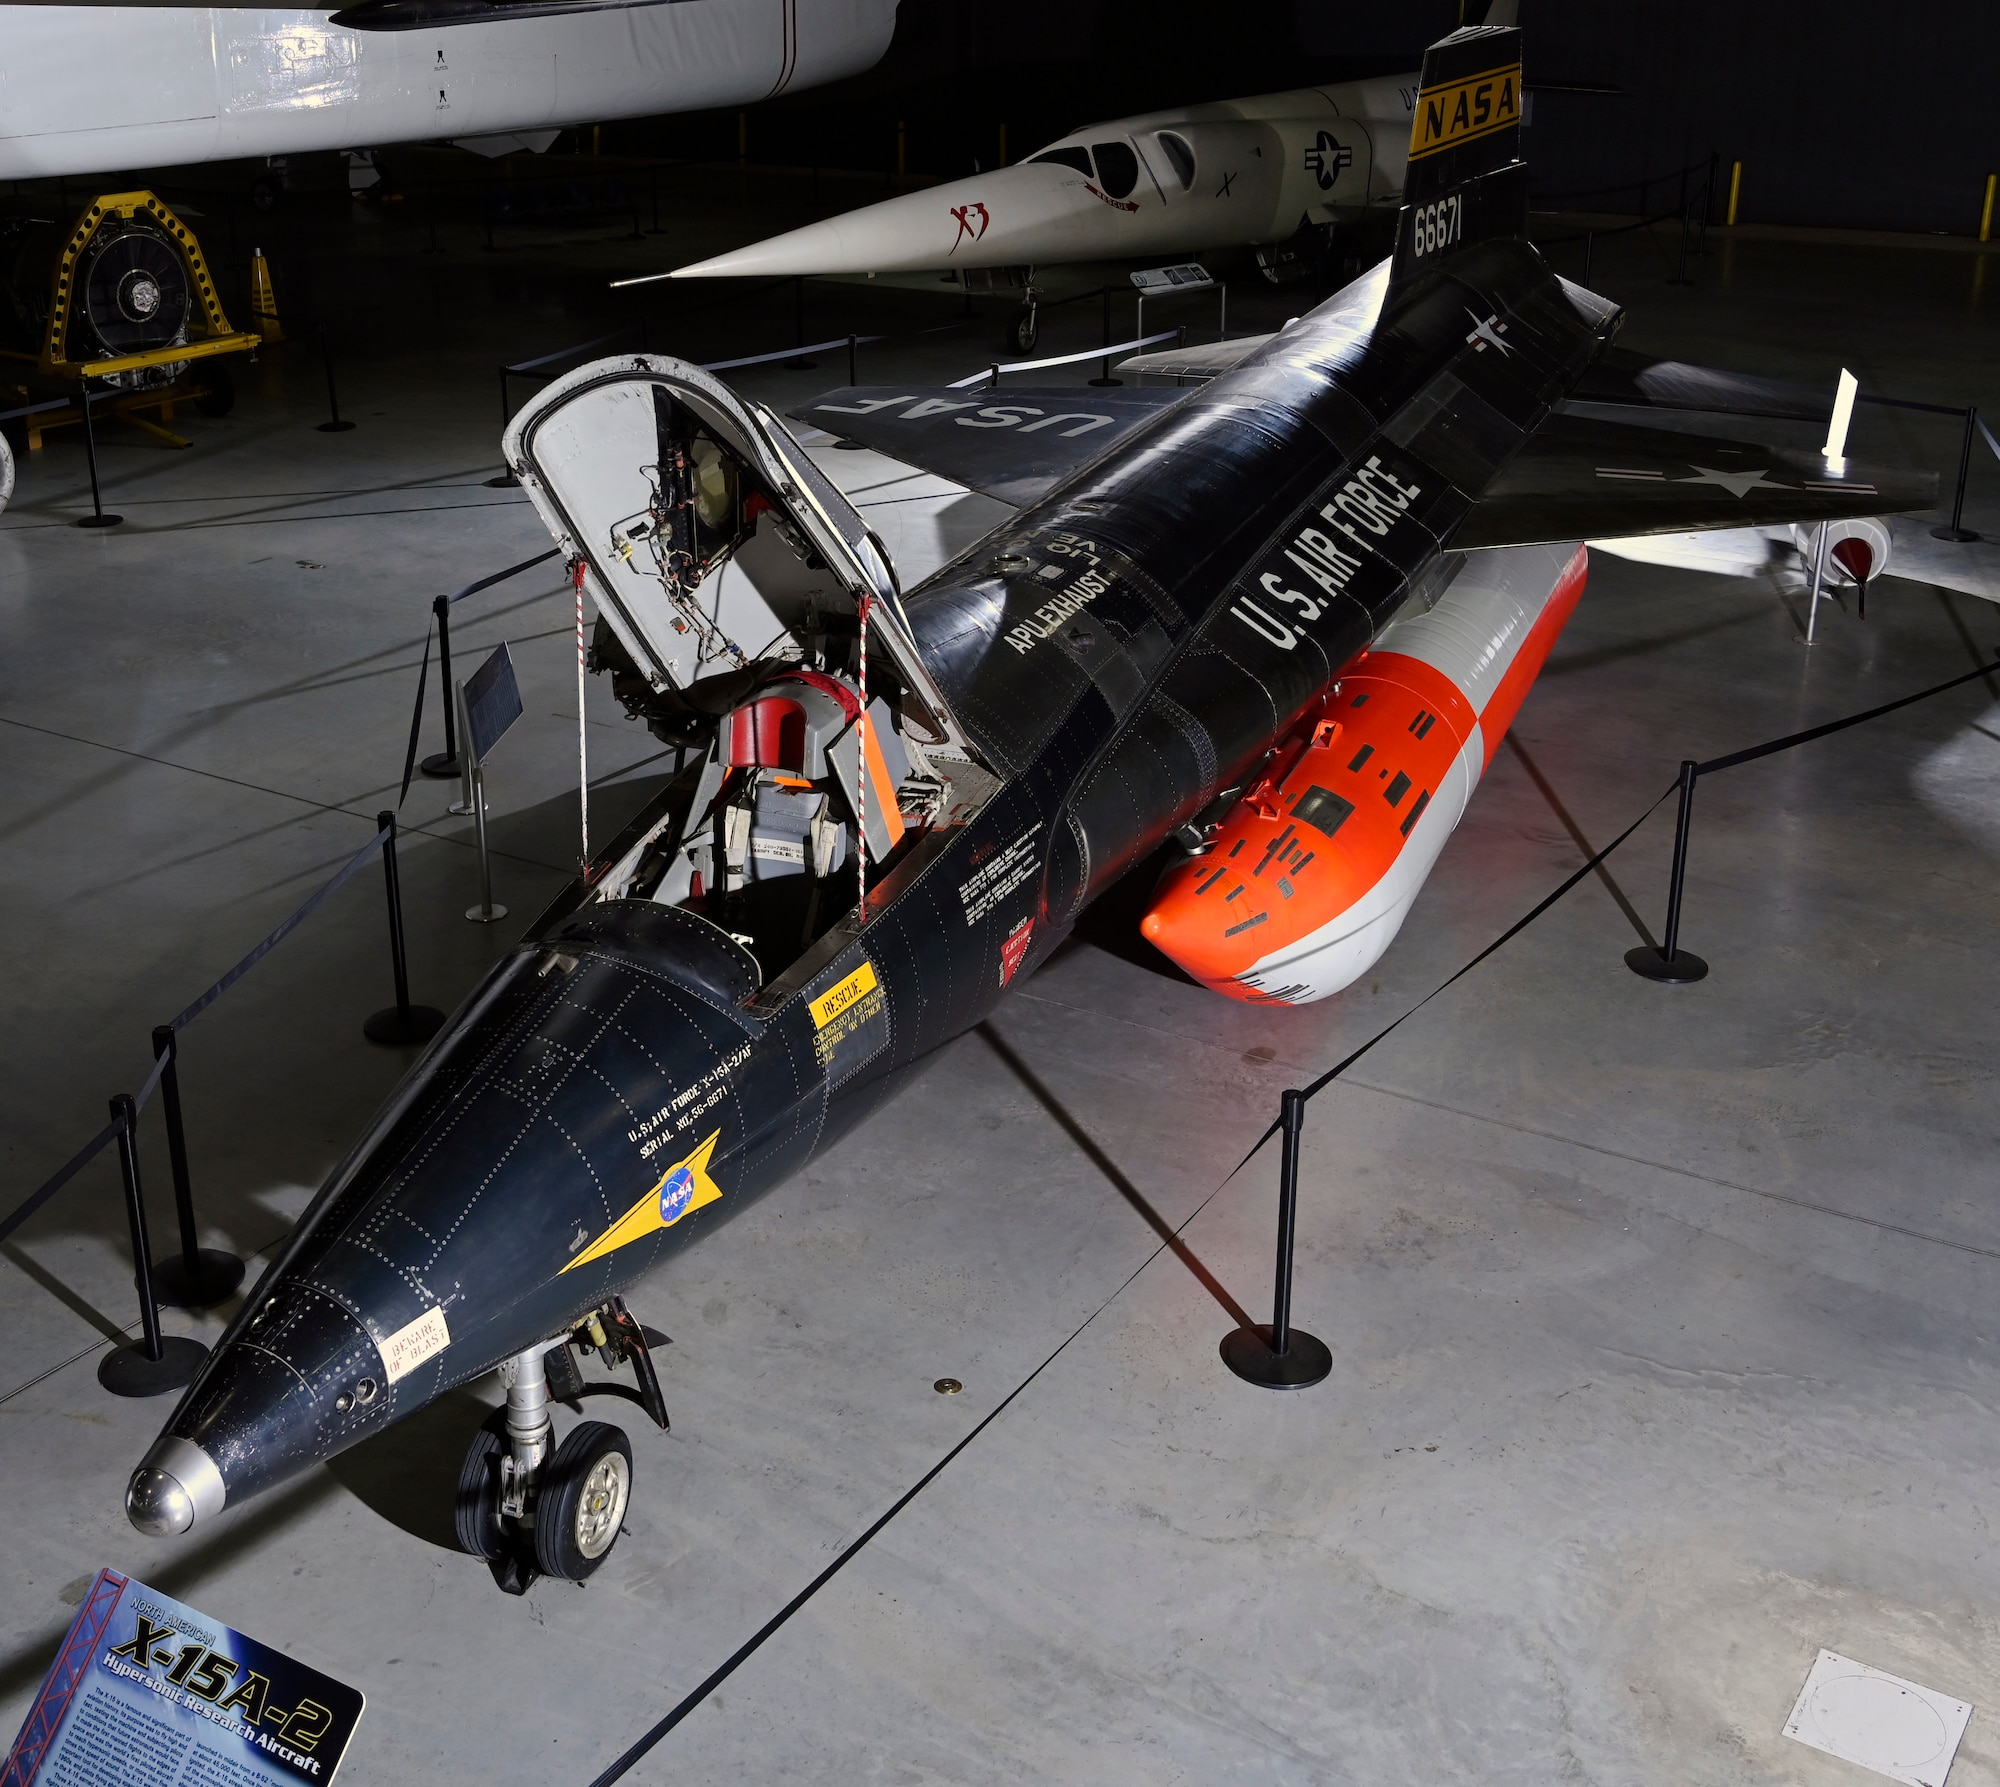 North American X-15A-2 on display in the National Museum of the U.S. Air Force Space Gallery.